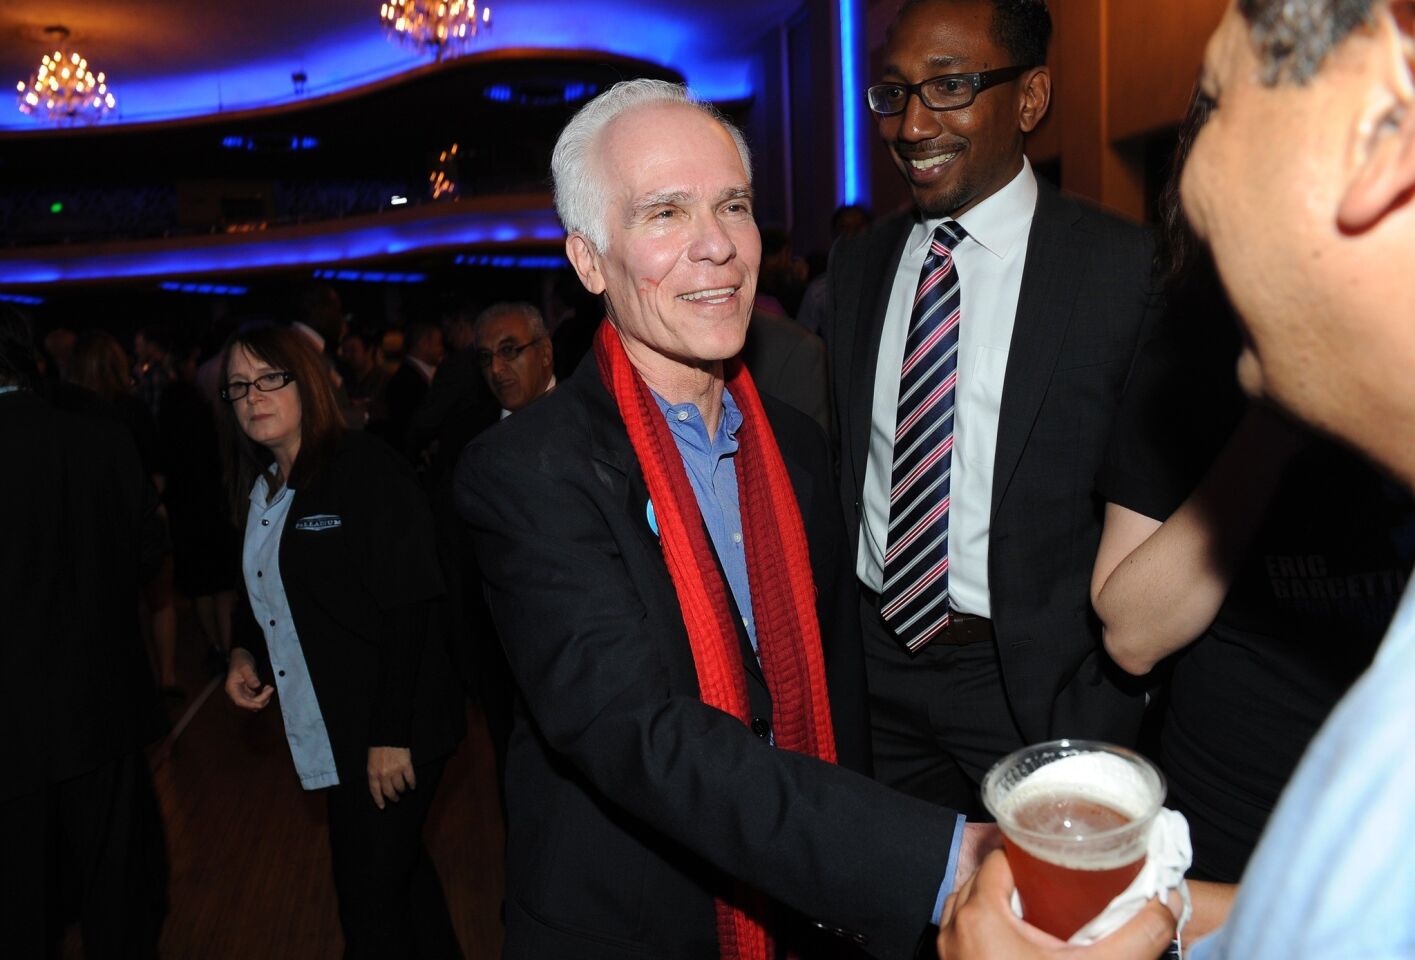 Former L.A. County Dist. Atty. Gil Garcetti greets supporters of his son, L.A. mayoral candidate Eric Garcetti, at an election night party at the Hollywood Palladium.